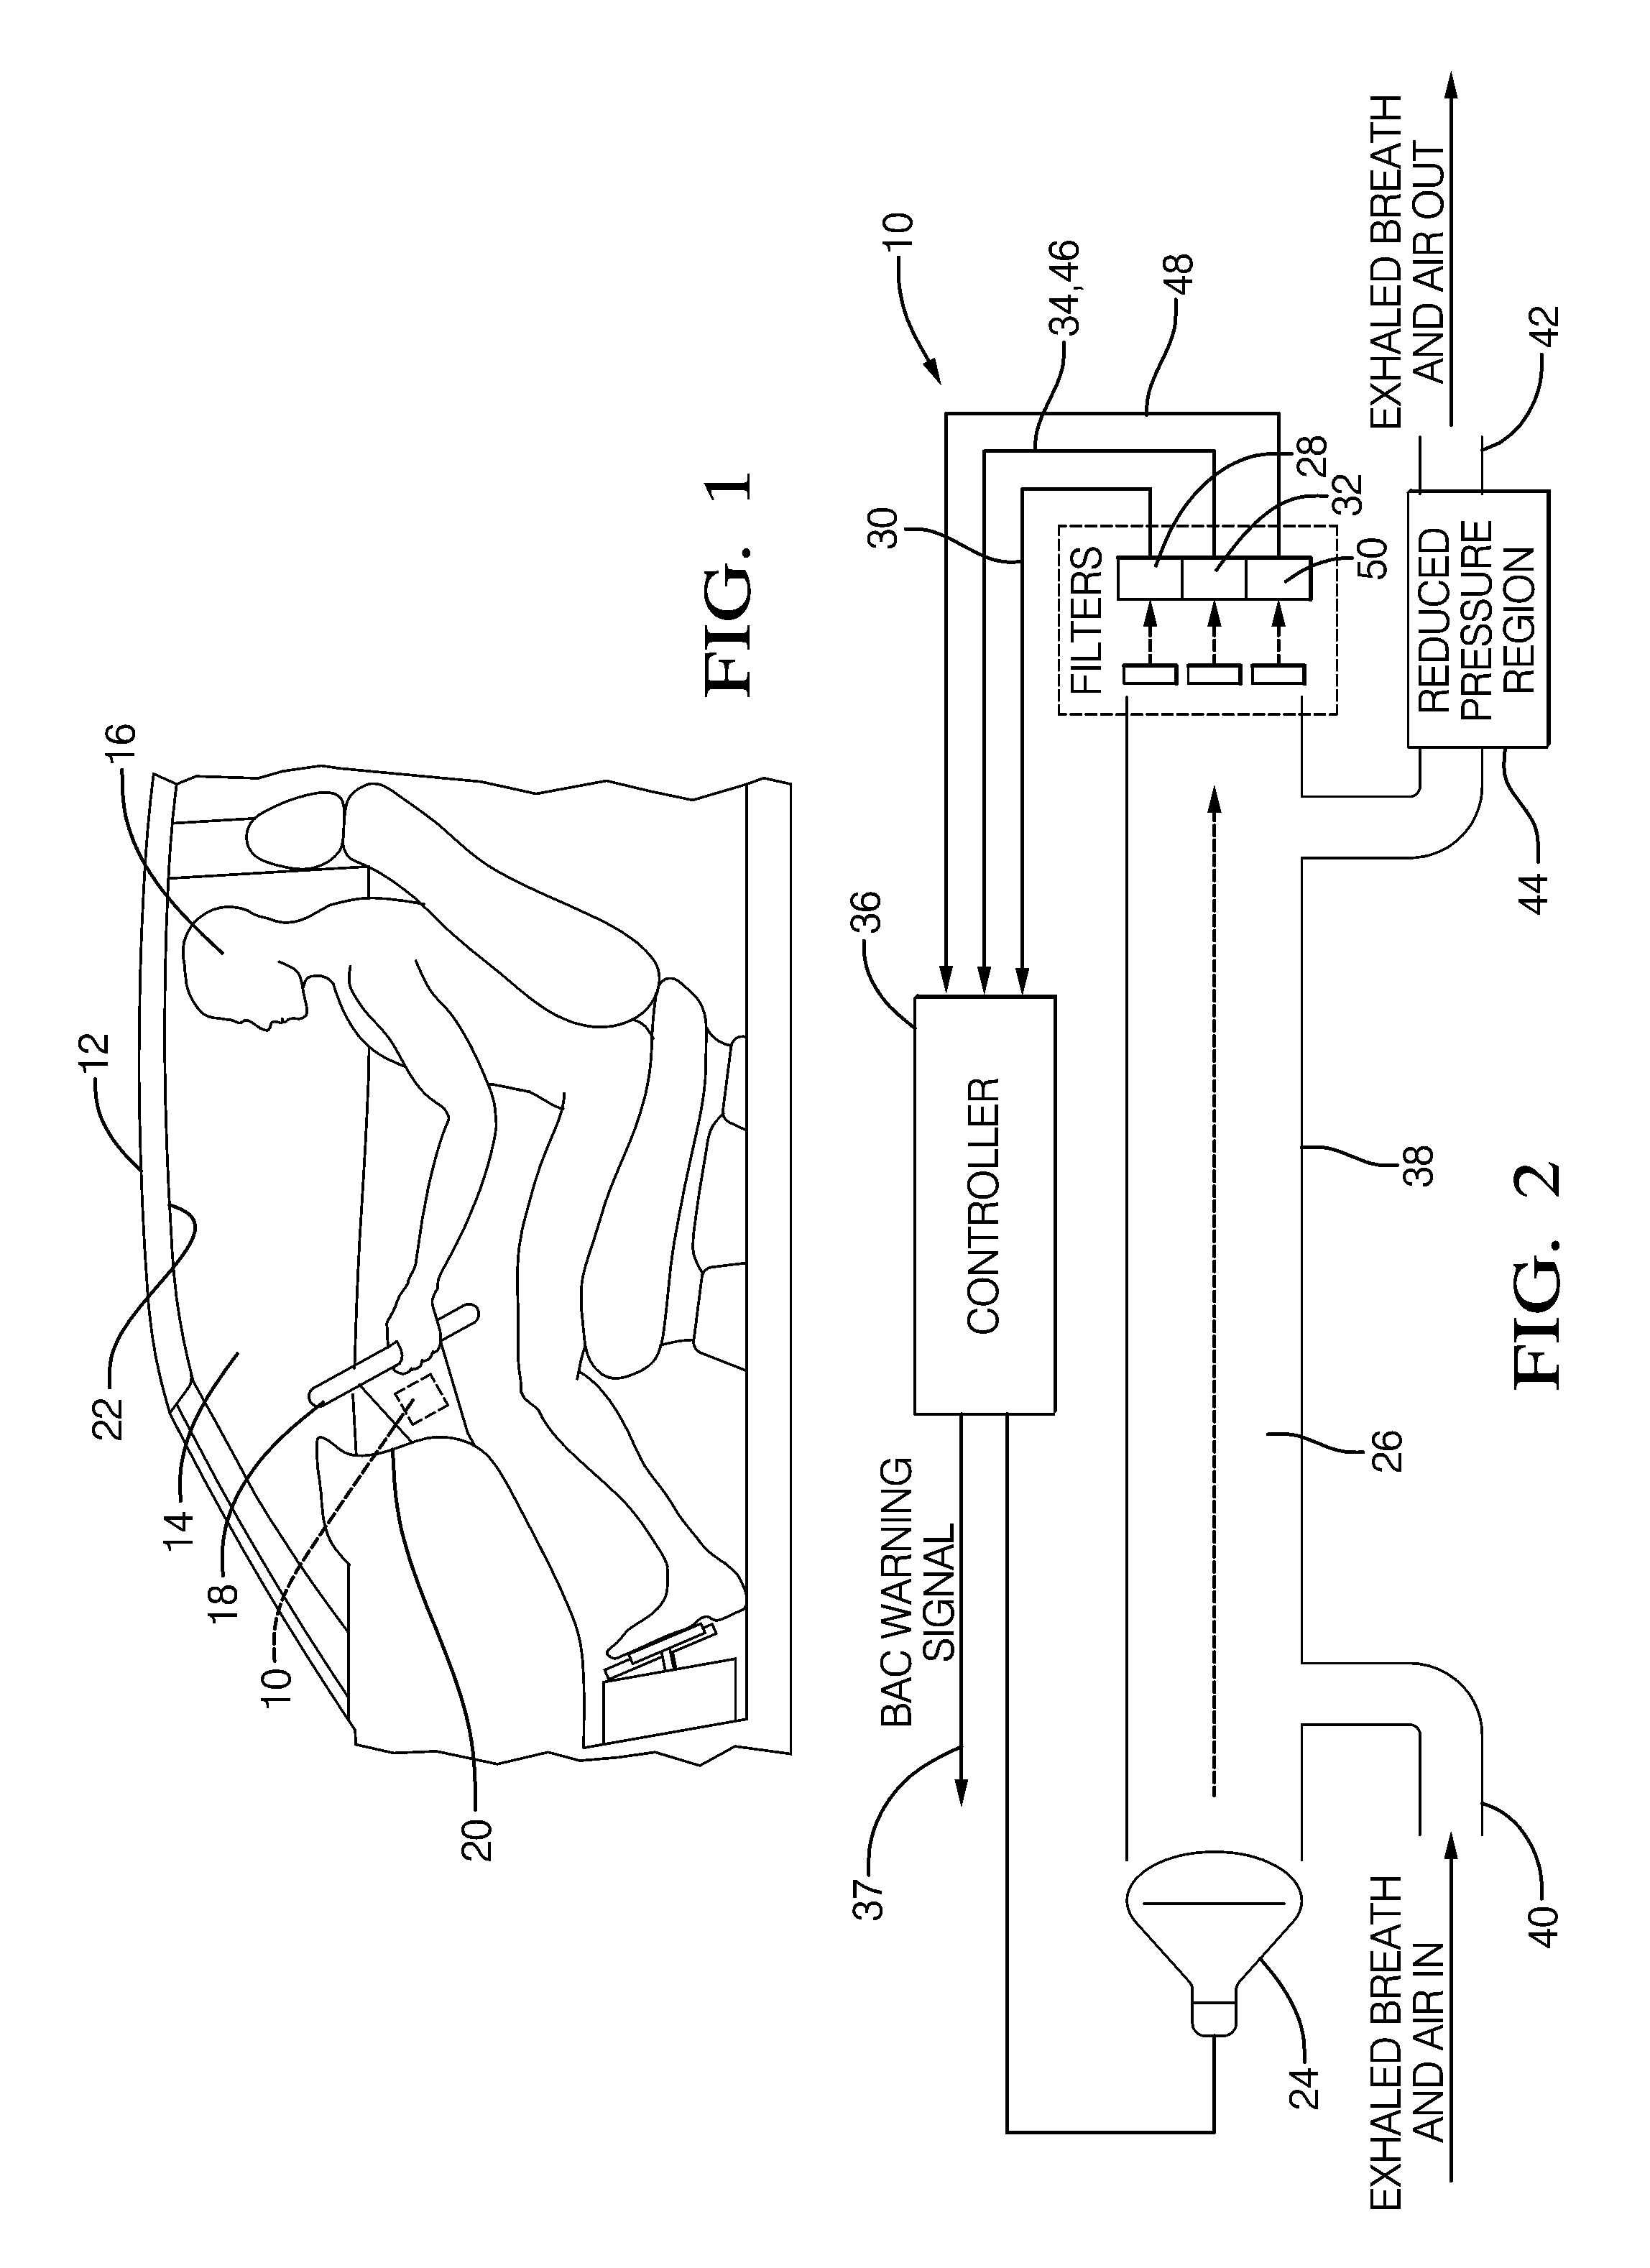 Breath analyzer system and method of operating the same